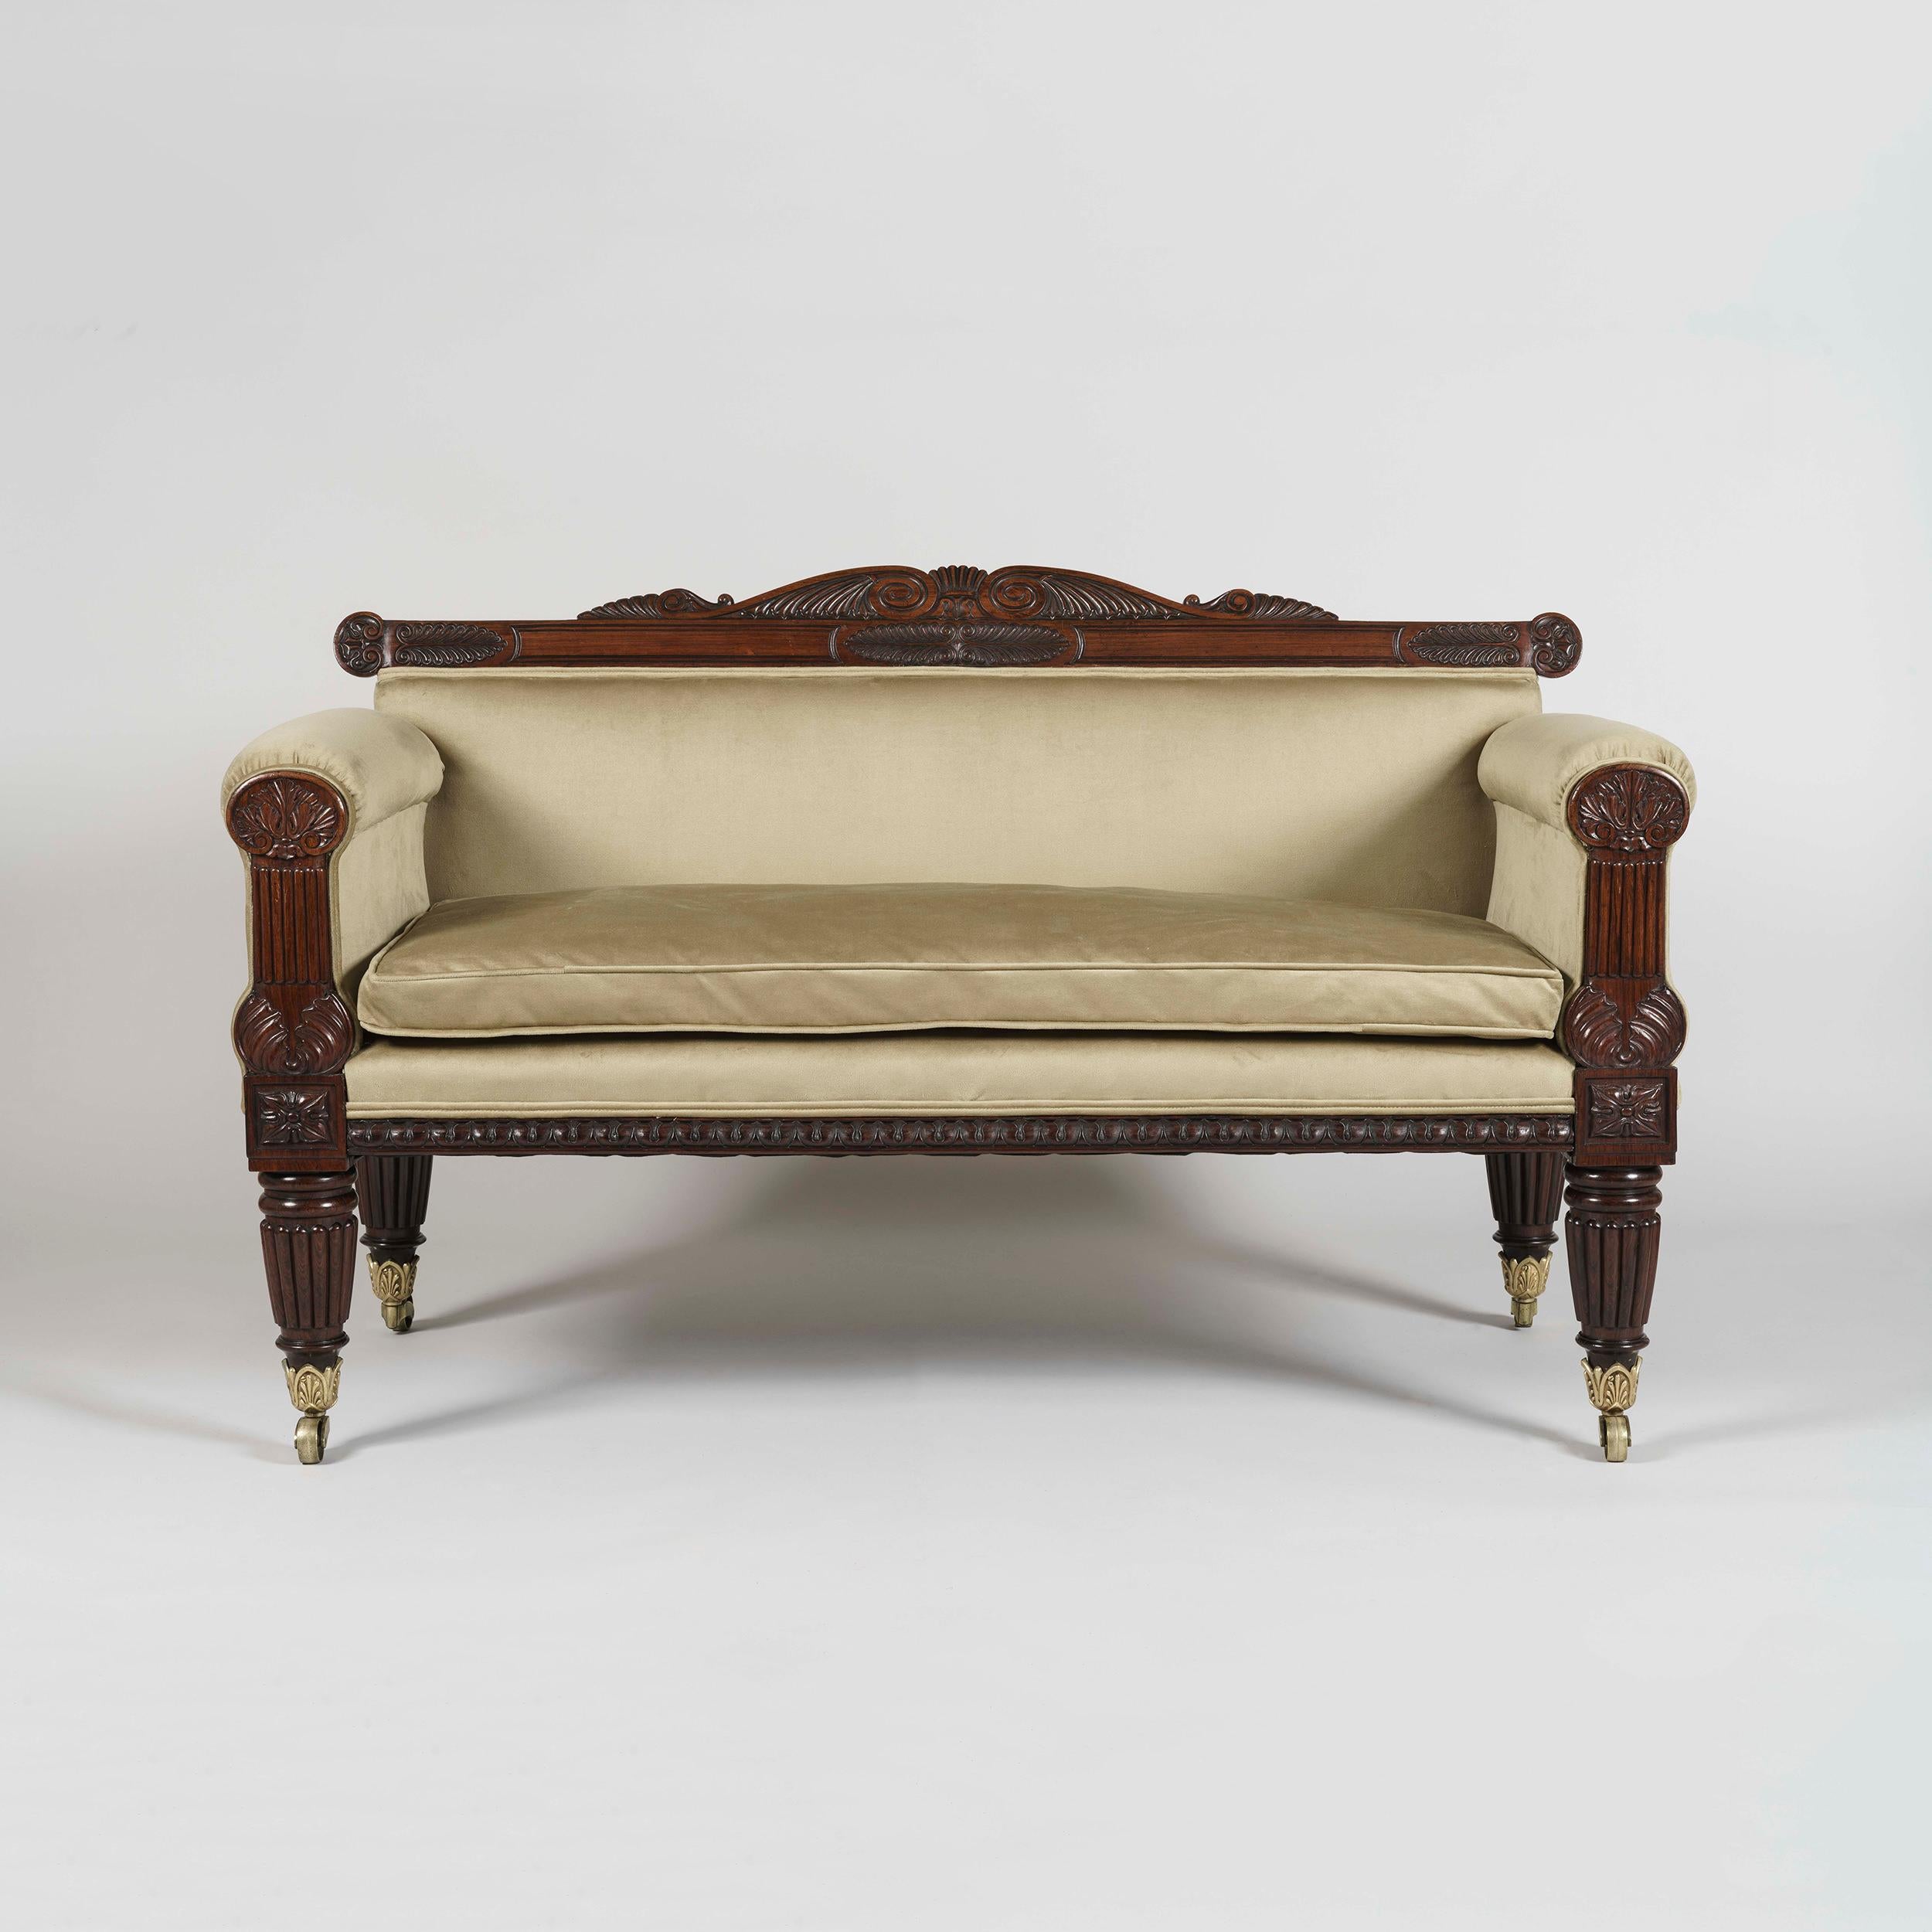 A superb George IV period sofa
In the Grecian Manner

Carved from richly colored rosewood, the rectilinear sofa designed in the Grecian manner, supported on four reeded and tapering legs with brass casters; the shaped end supports having tablets,